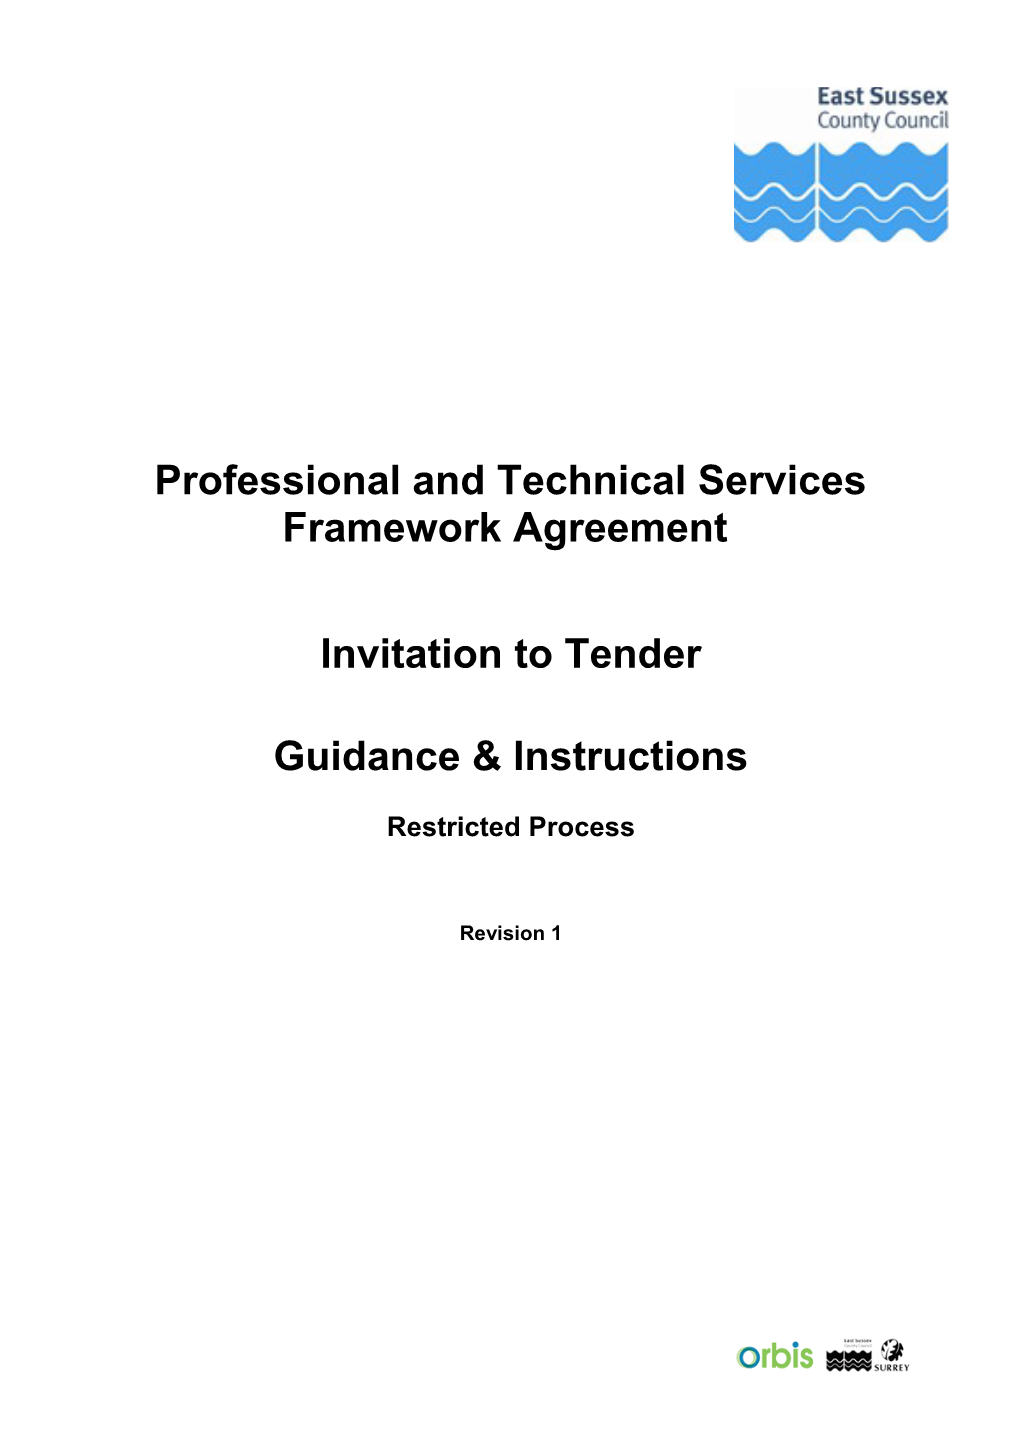 Professional and Technical Services Framework Agreement